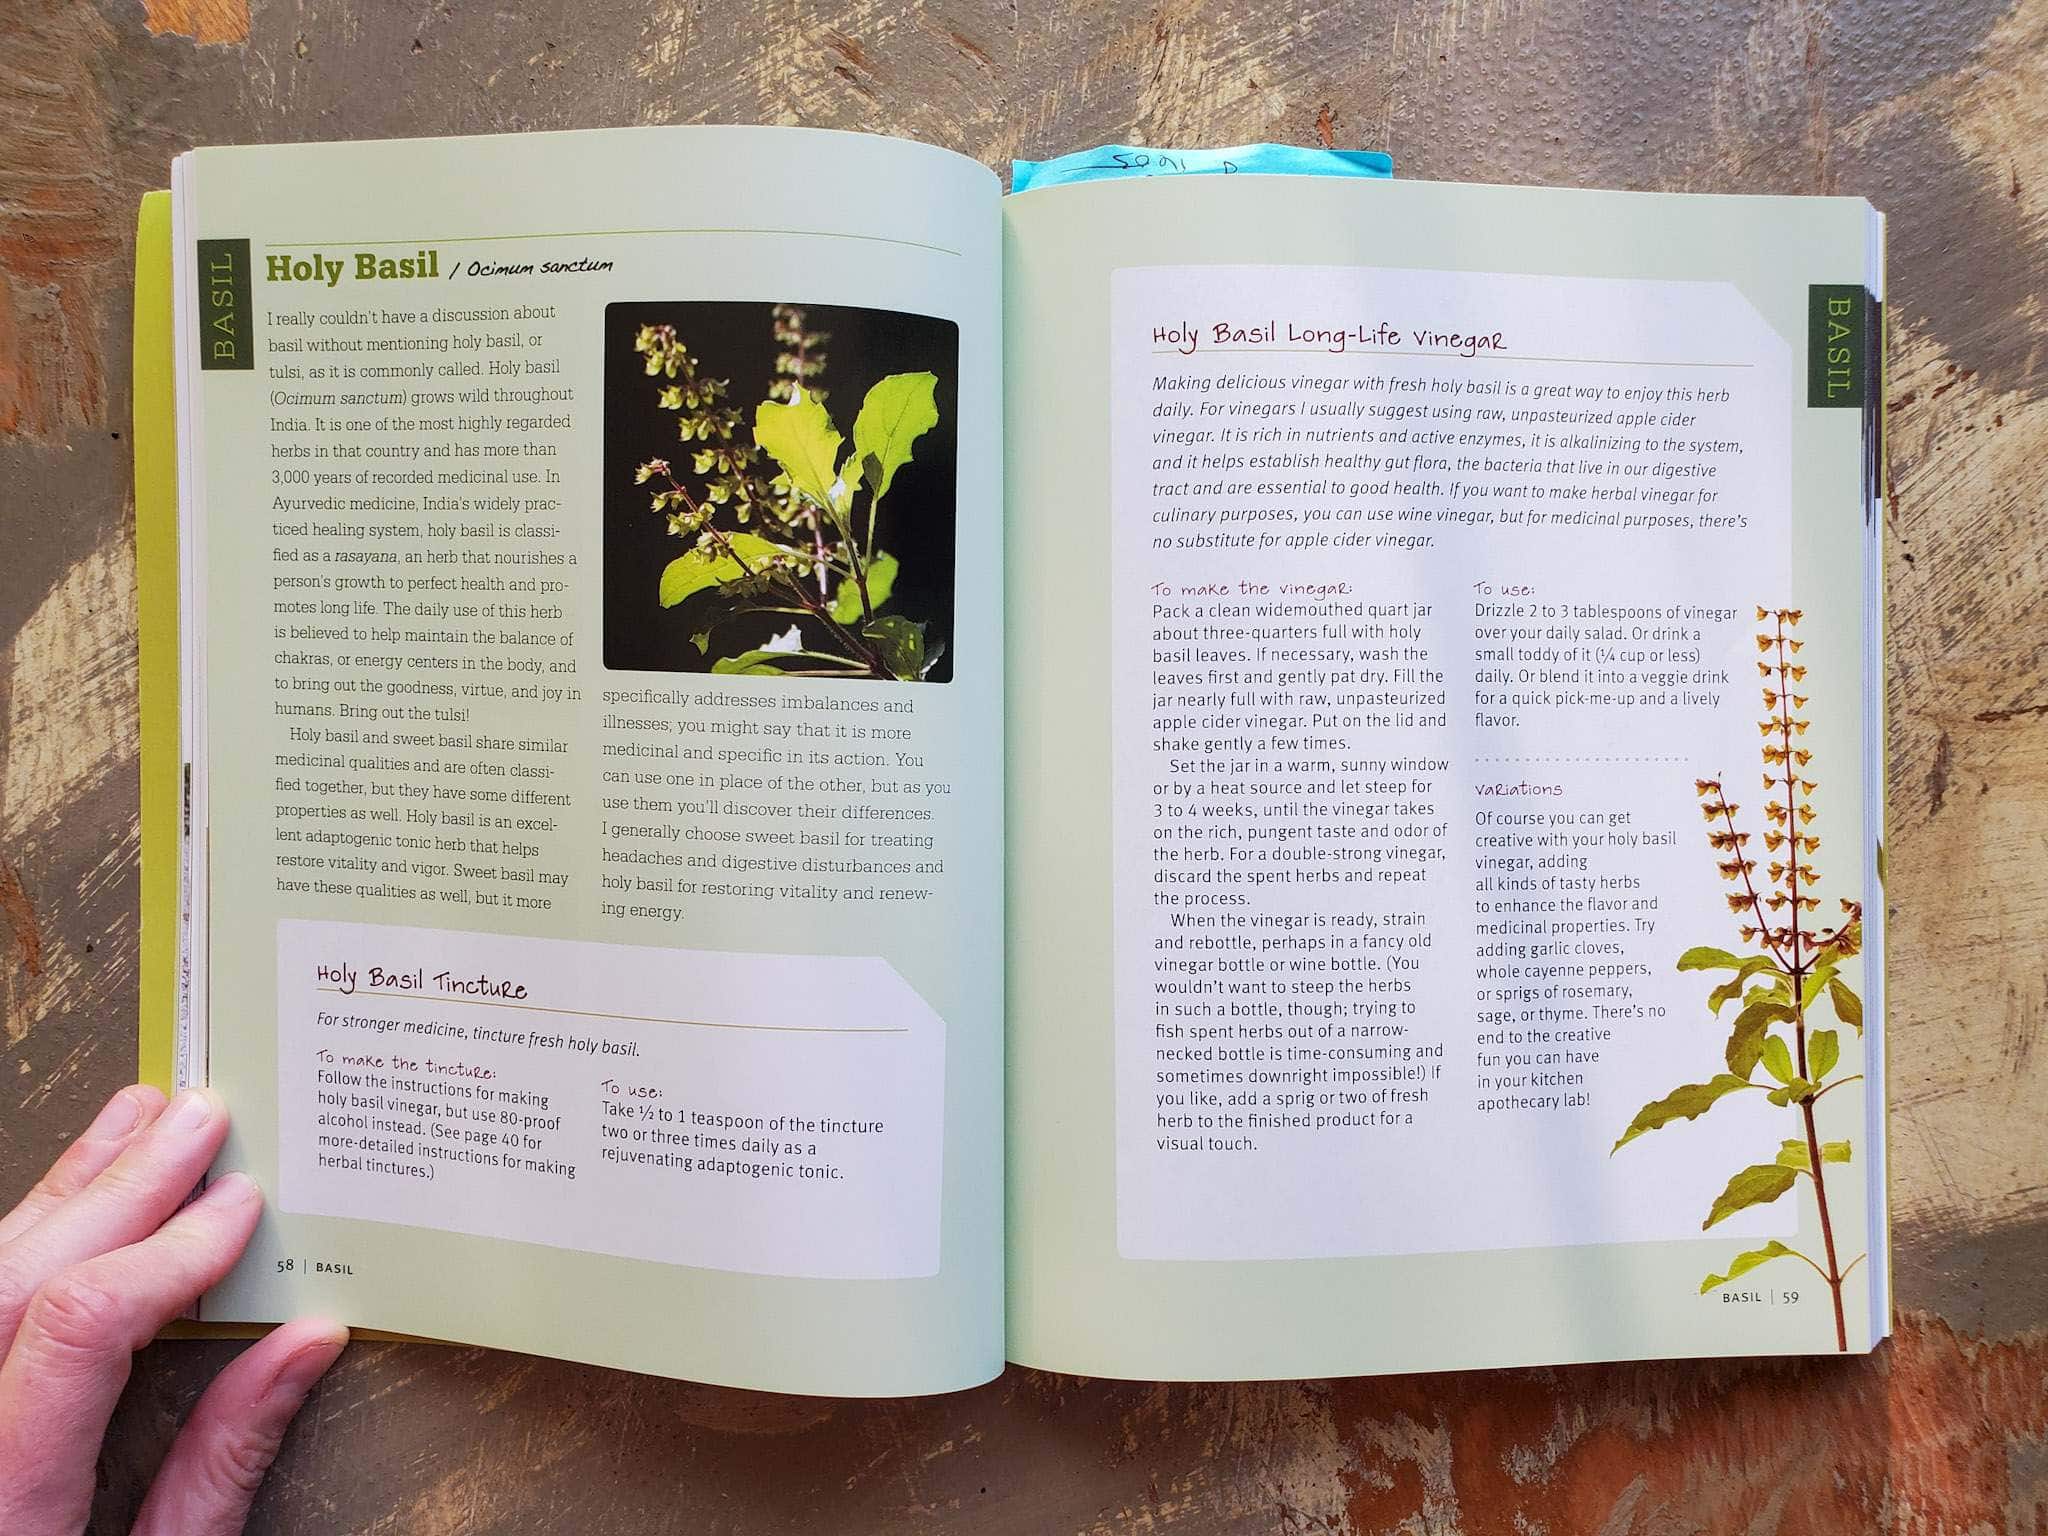 A medicinal herbs book is open to a page about Holy Basil. Recipes are include for a Holy Basil Tincture as well as a Holy Basil Long-Life Vinegar. 